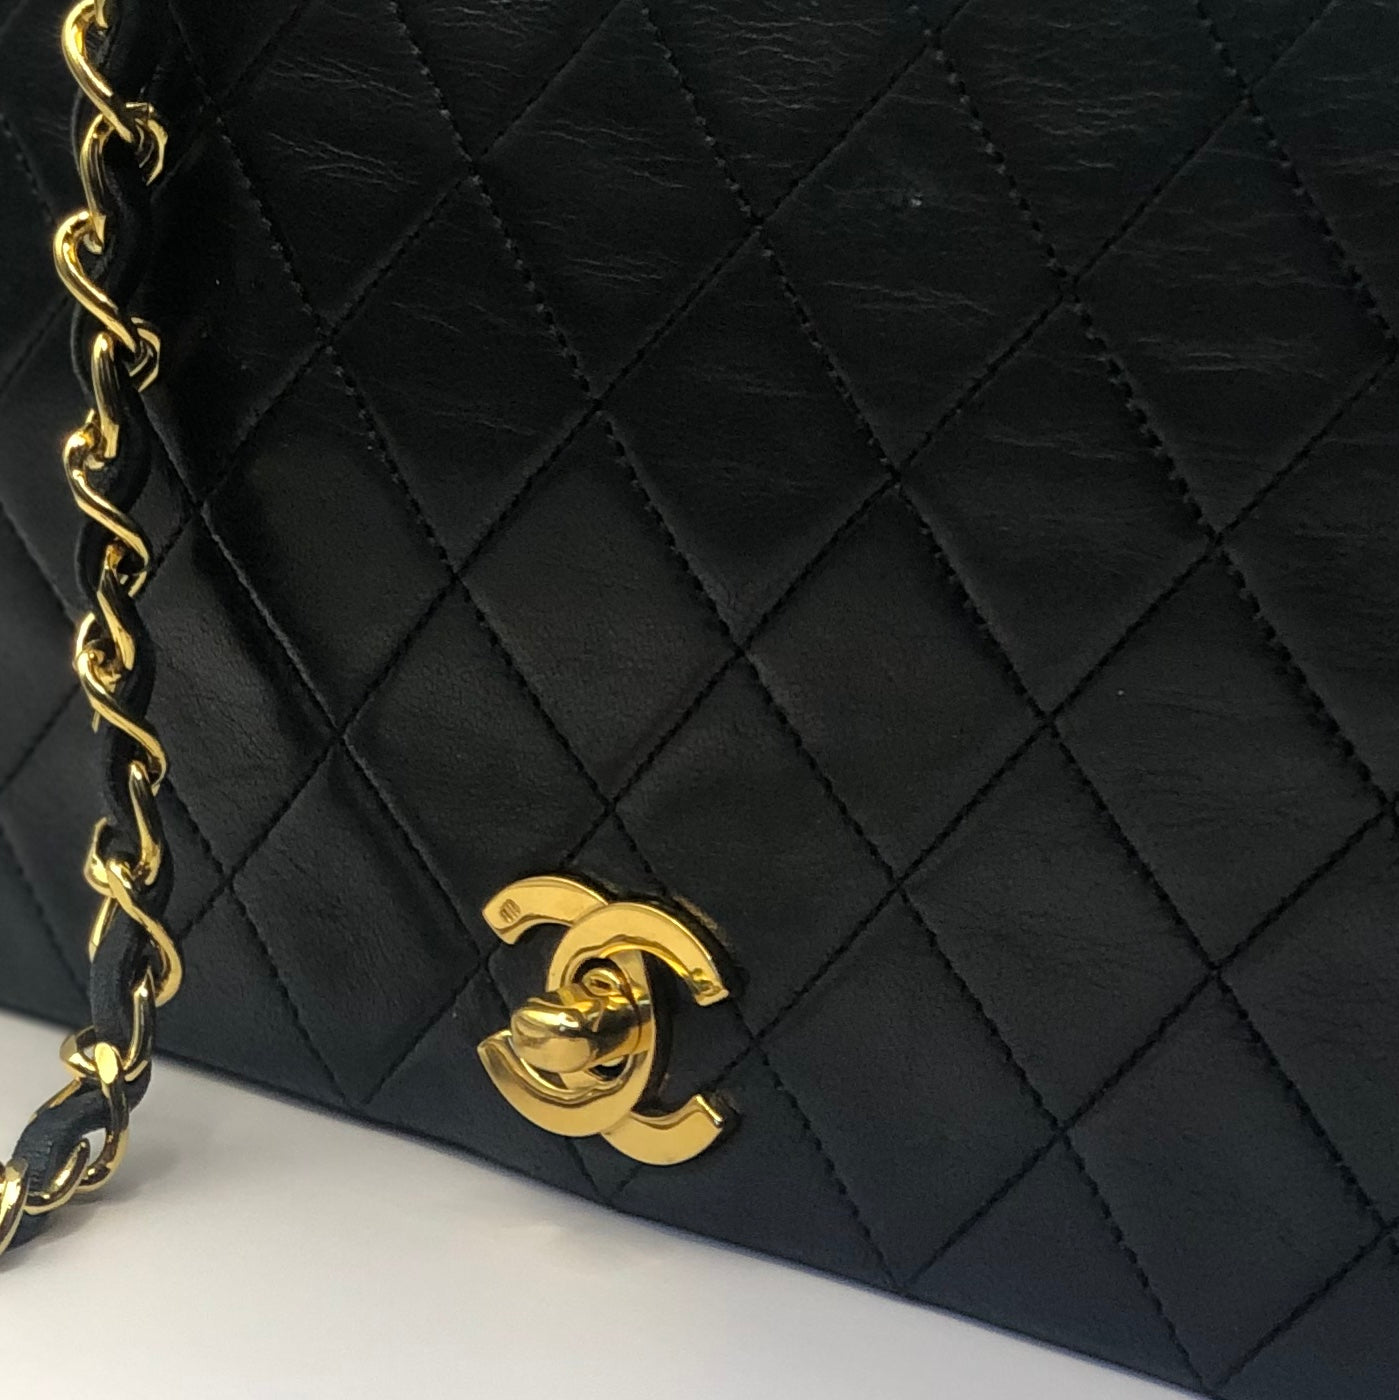 Chanel Classic Full Flap Medium Vintage – The Vintage New Yorker